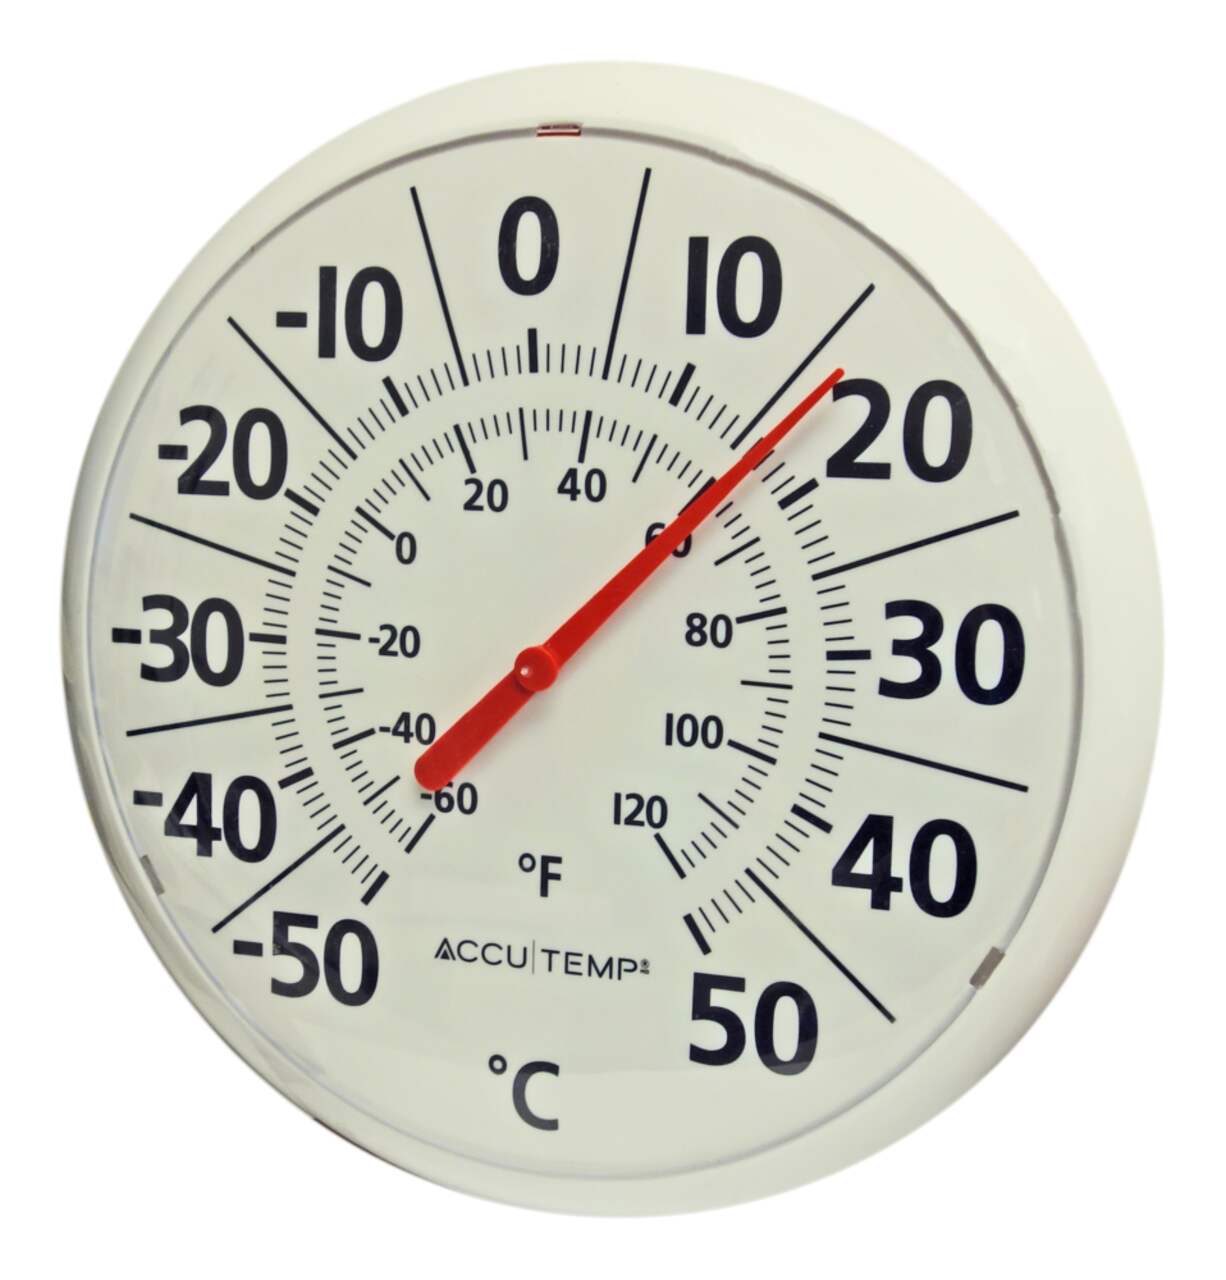 Indoor and outdoor thermometers are small devices with a great